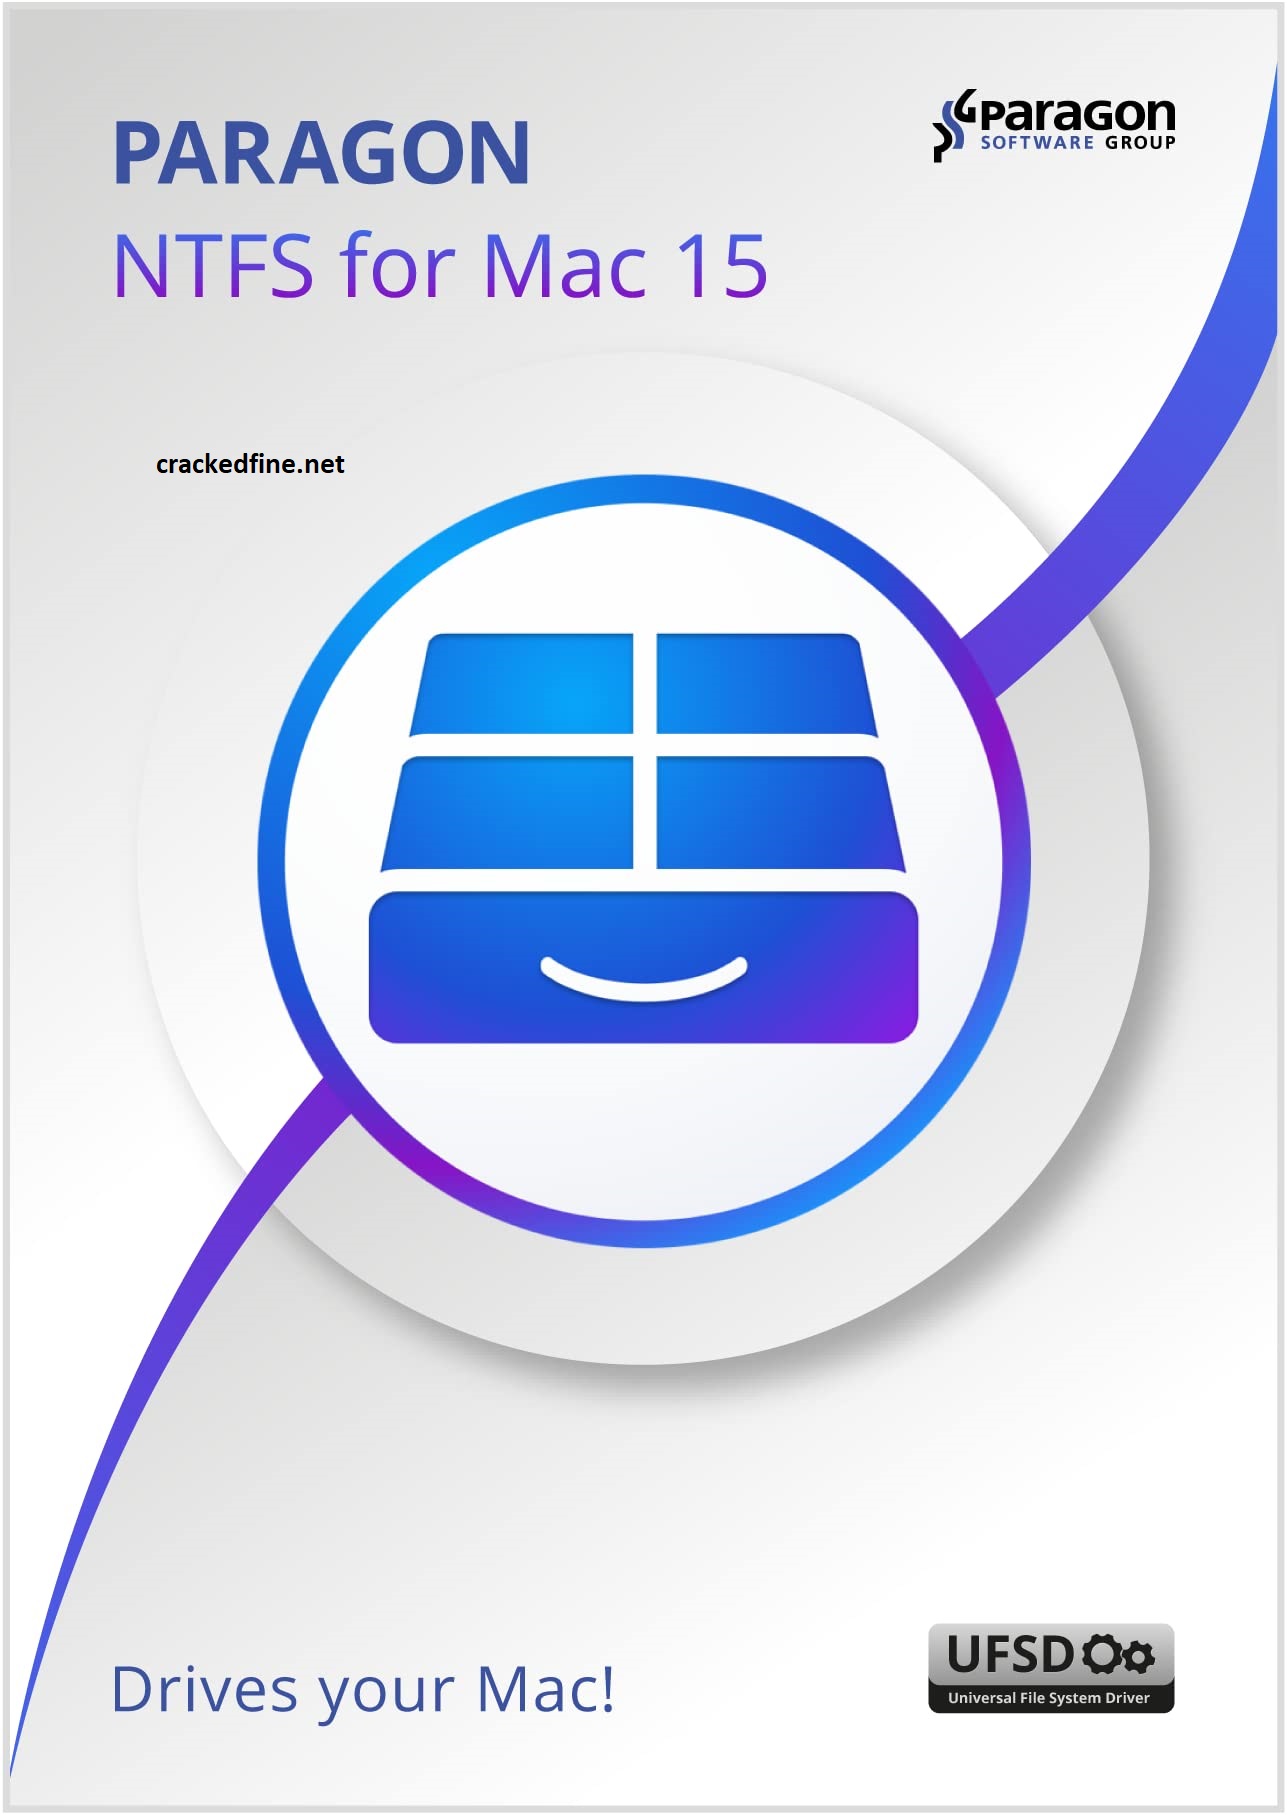 activate paragon ntfs for mac